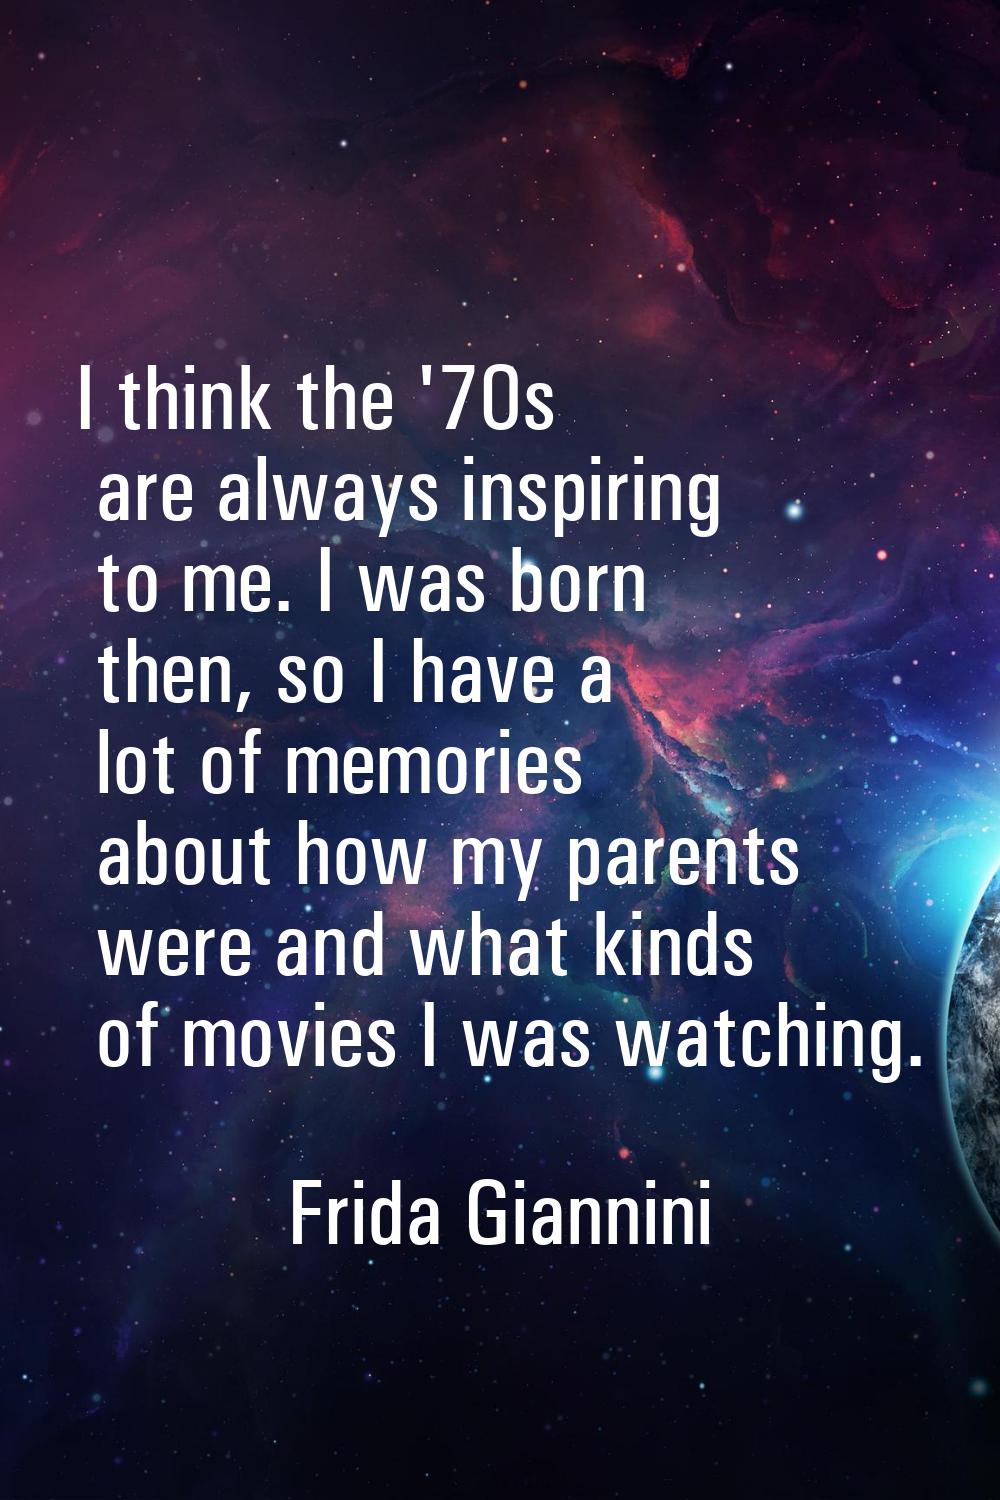 I think the '70s are always inspiring to me. I was born then, so I have a lot of memories about how